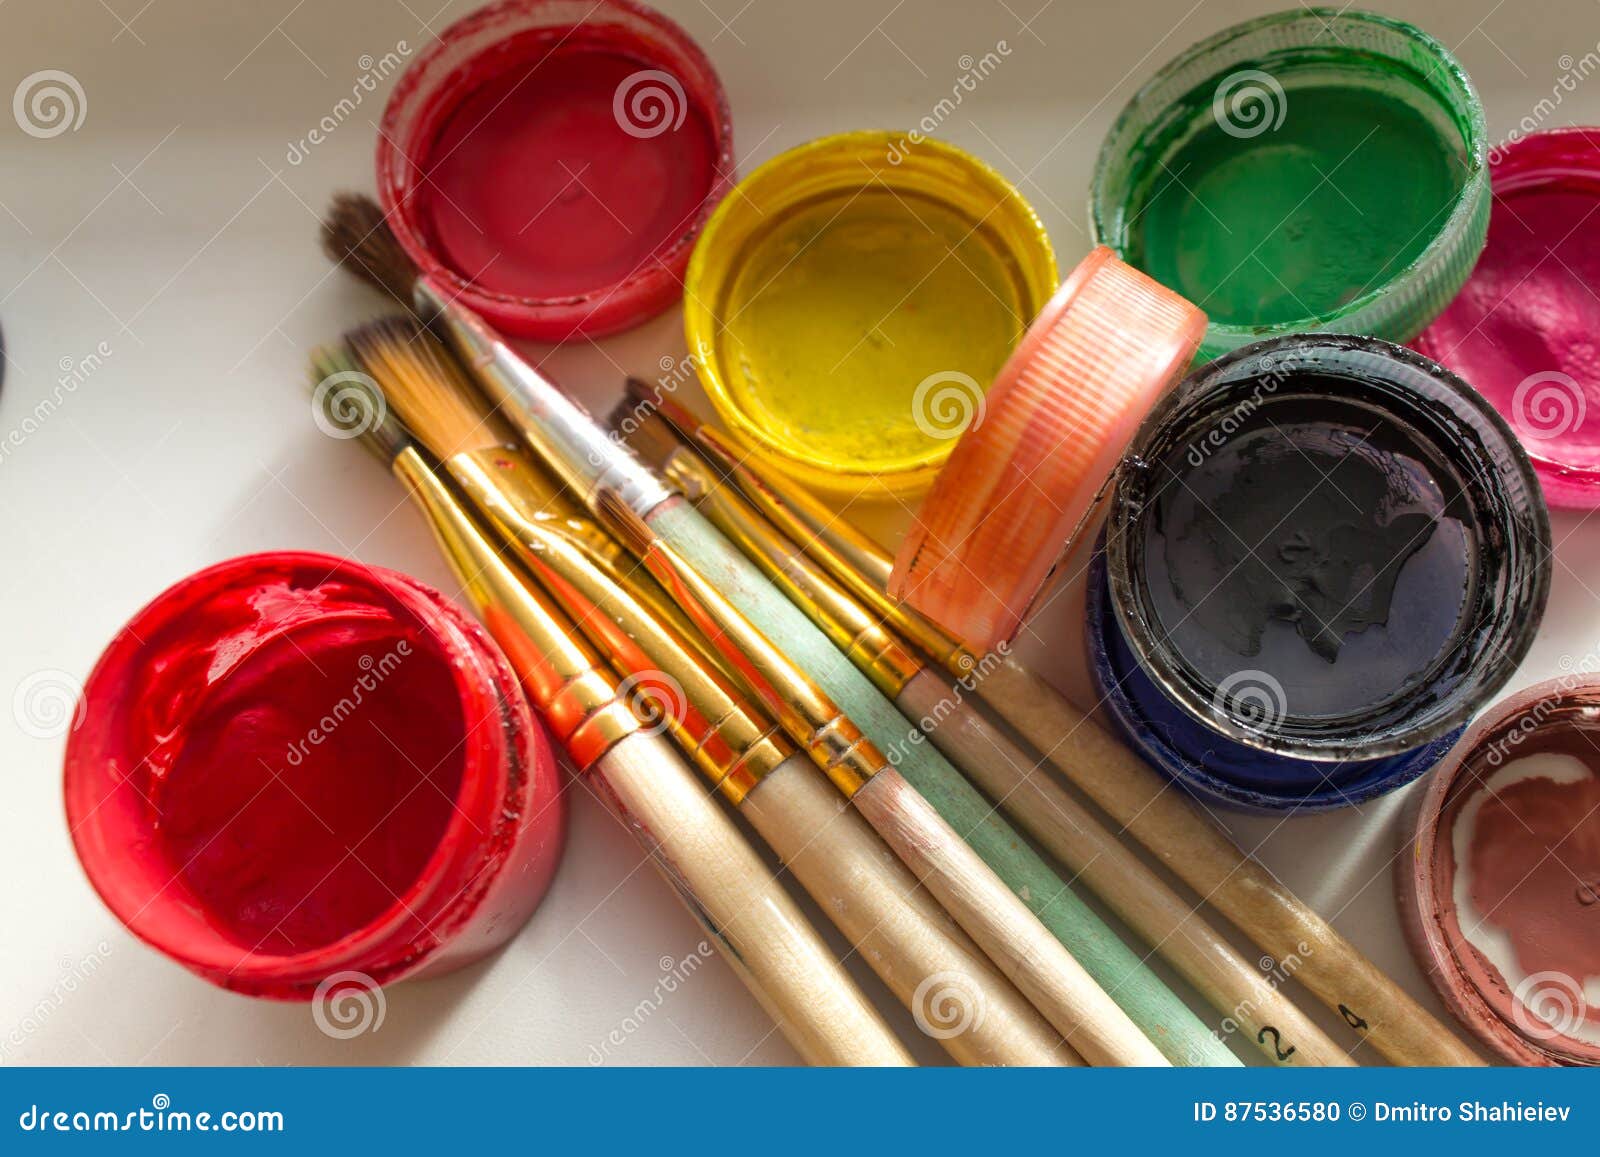 Cans of paint and a brush stock photo. Image of house - 87536580